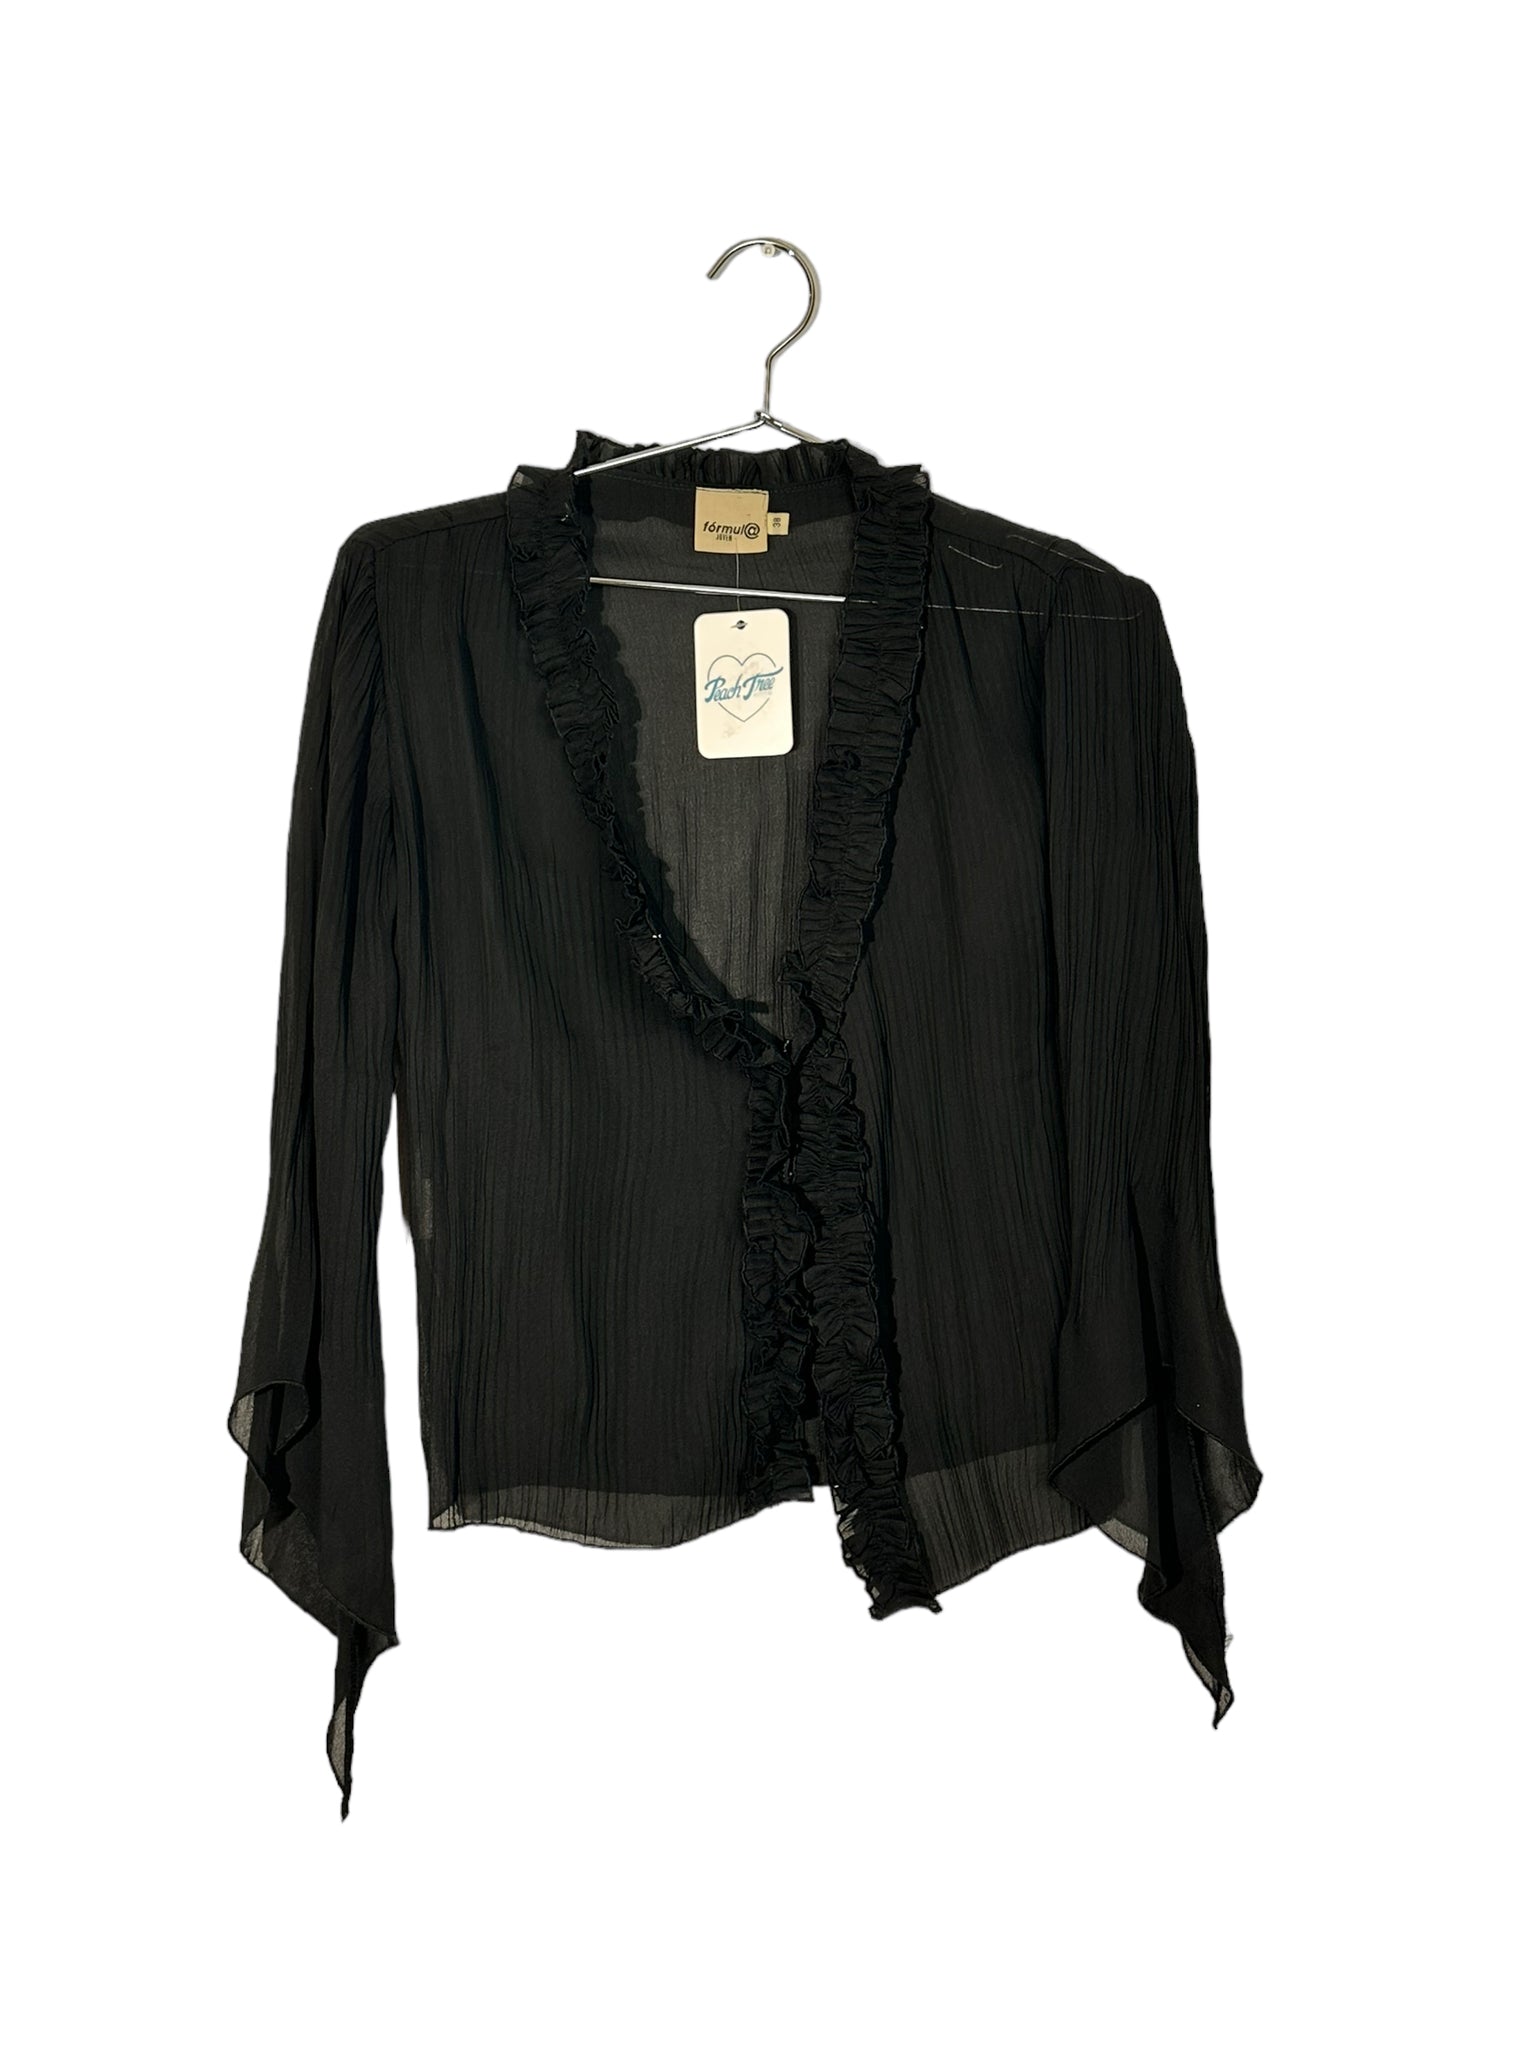 Black Sheer Button Up